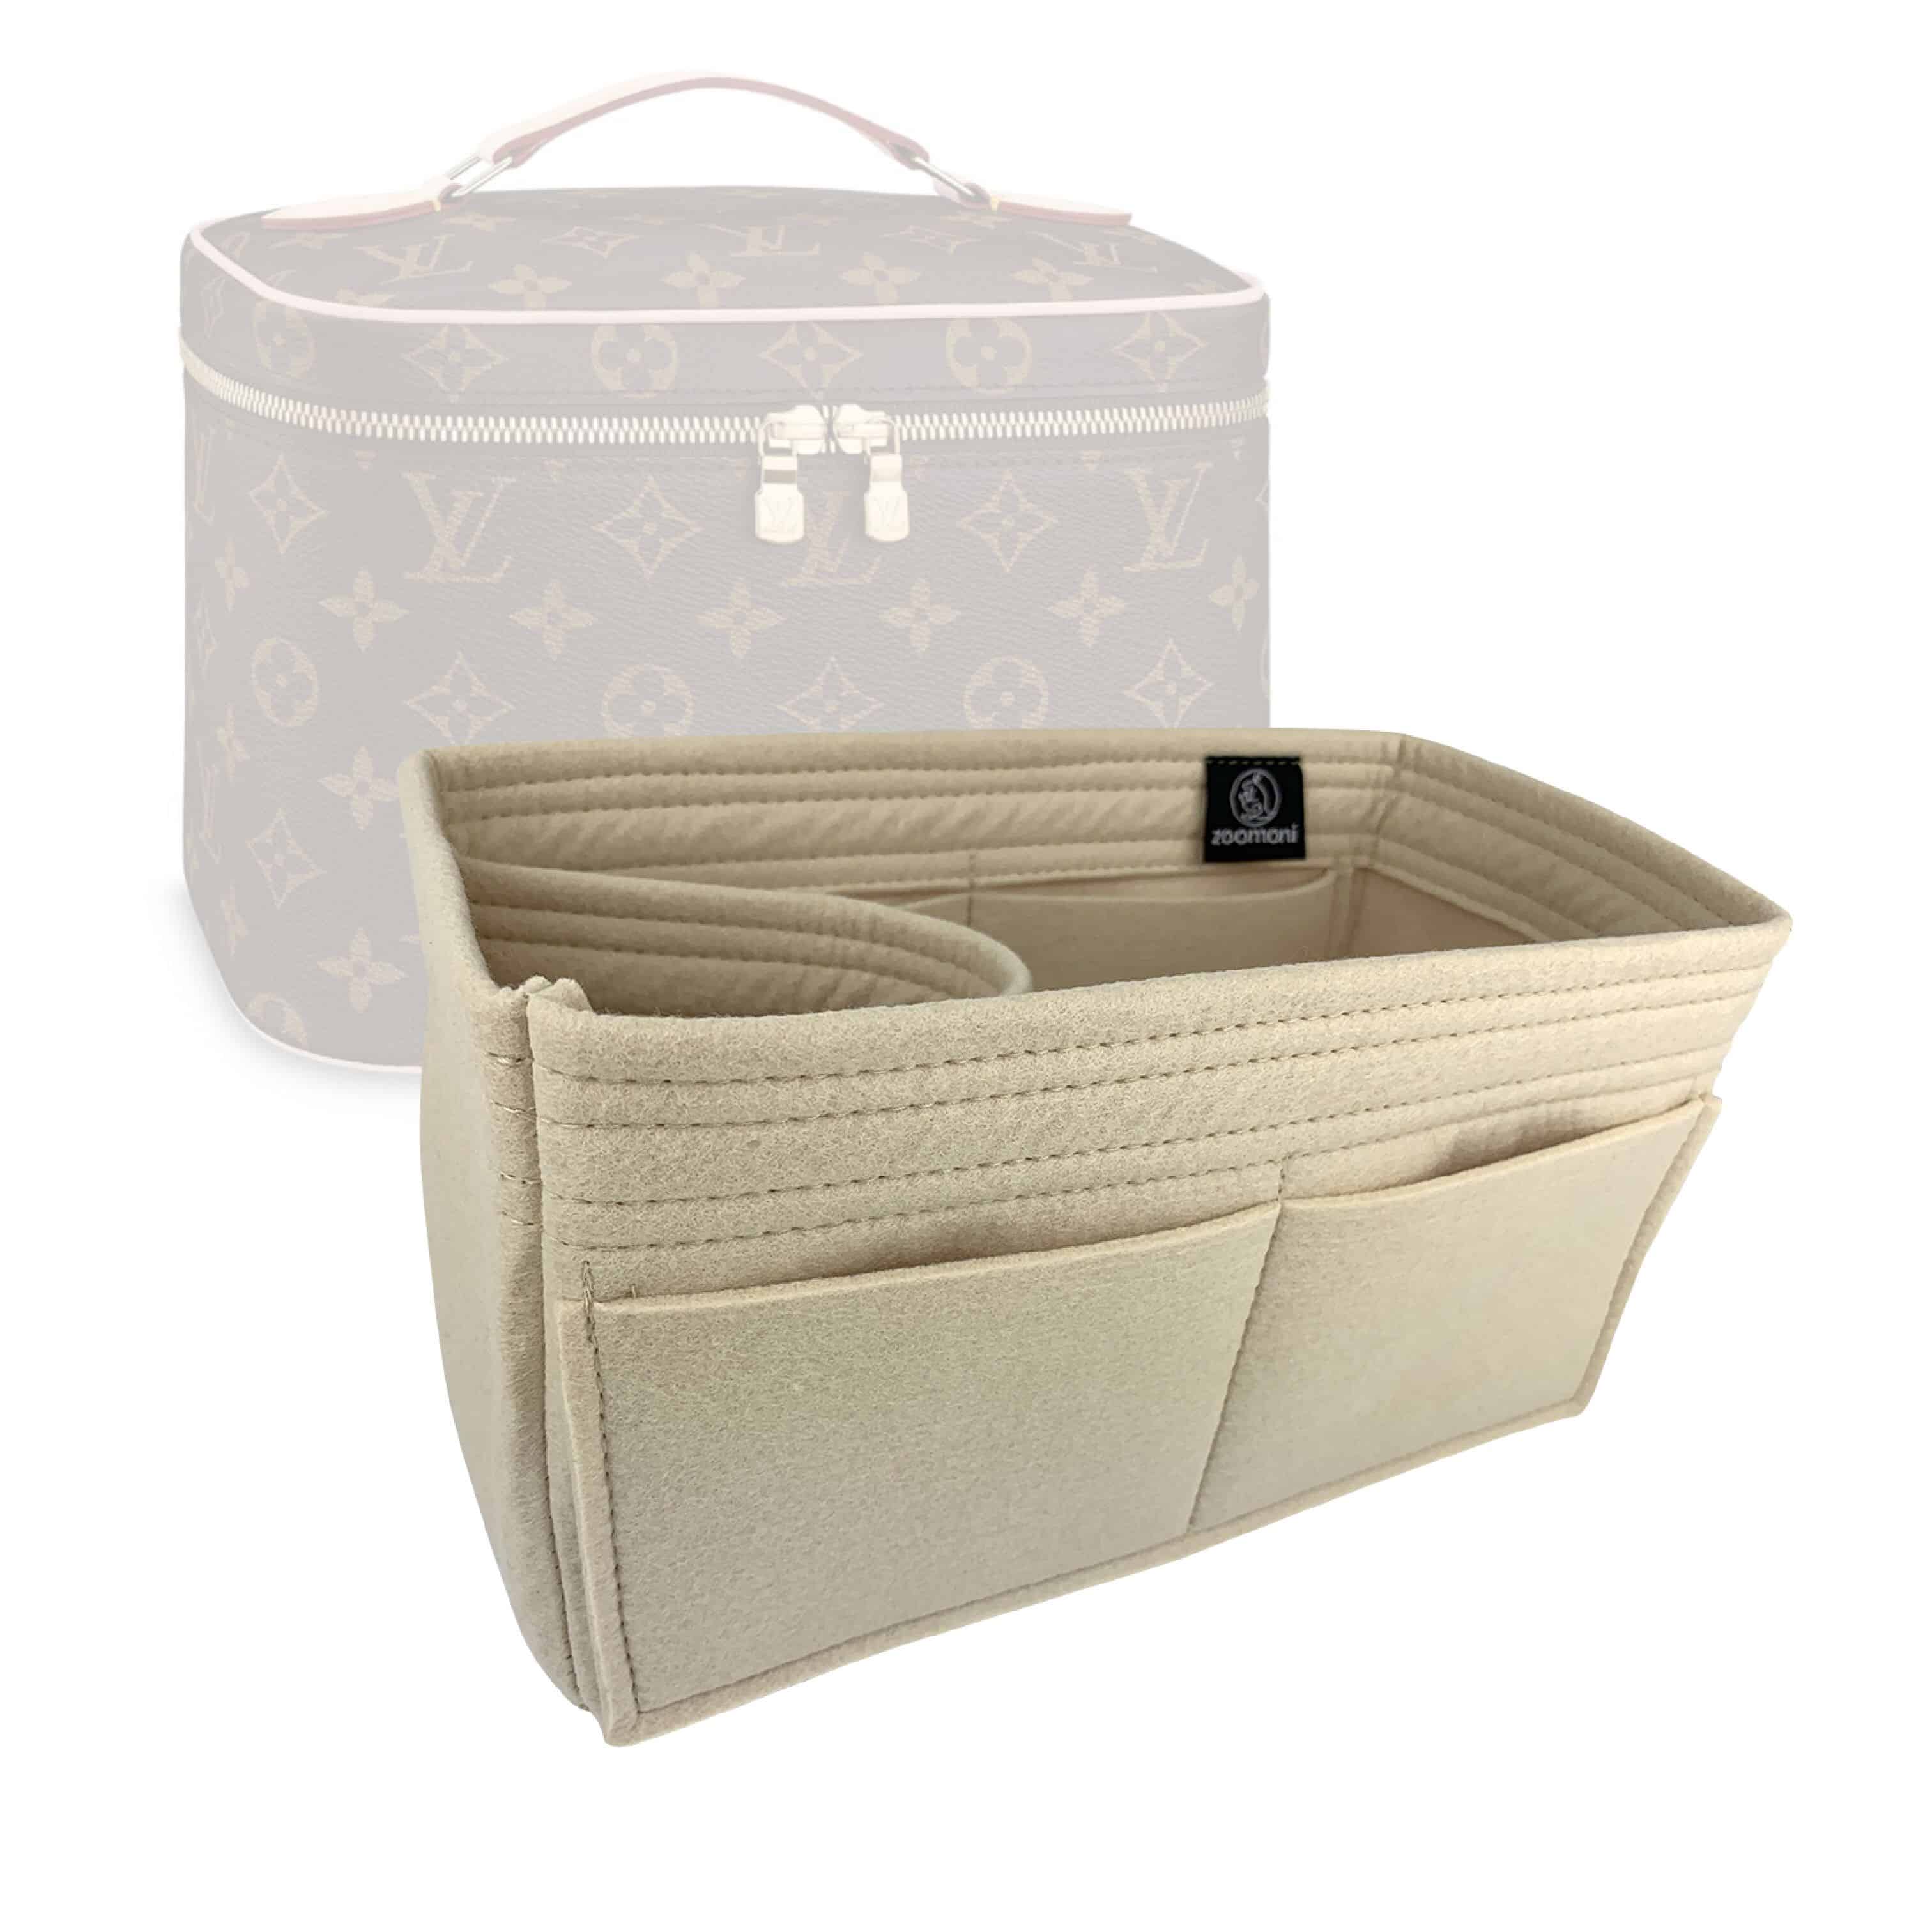 Louis Vuitton Artsy Organizer Insert, Bag Organizer with Middle Compartment